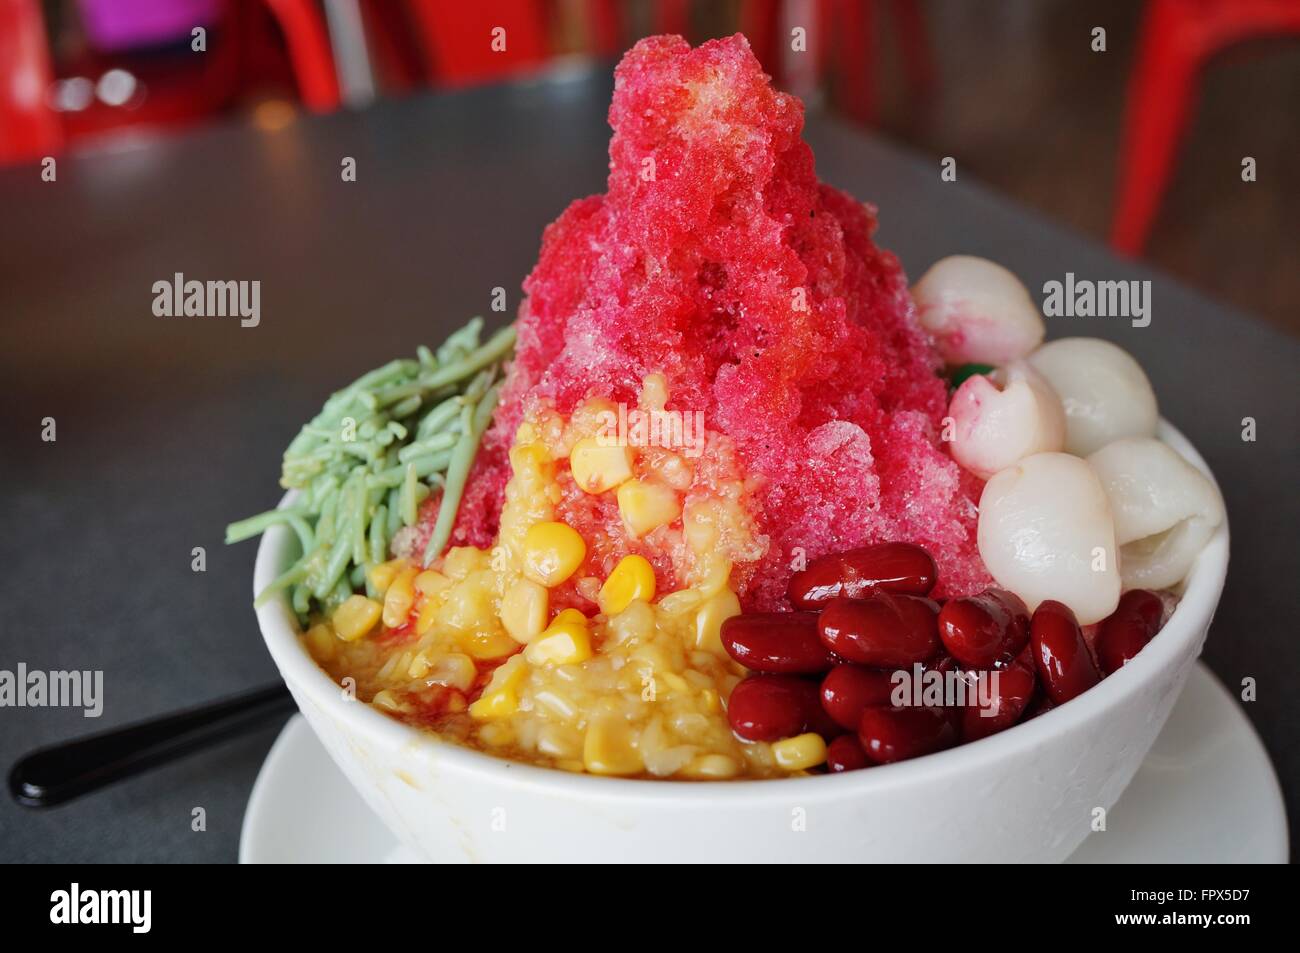 Ais Kacang (ABC), a colorful Malaysian dessert made of shaved ice, beans and colored jelly Stock Photo